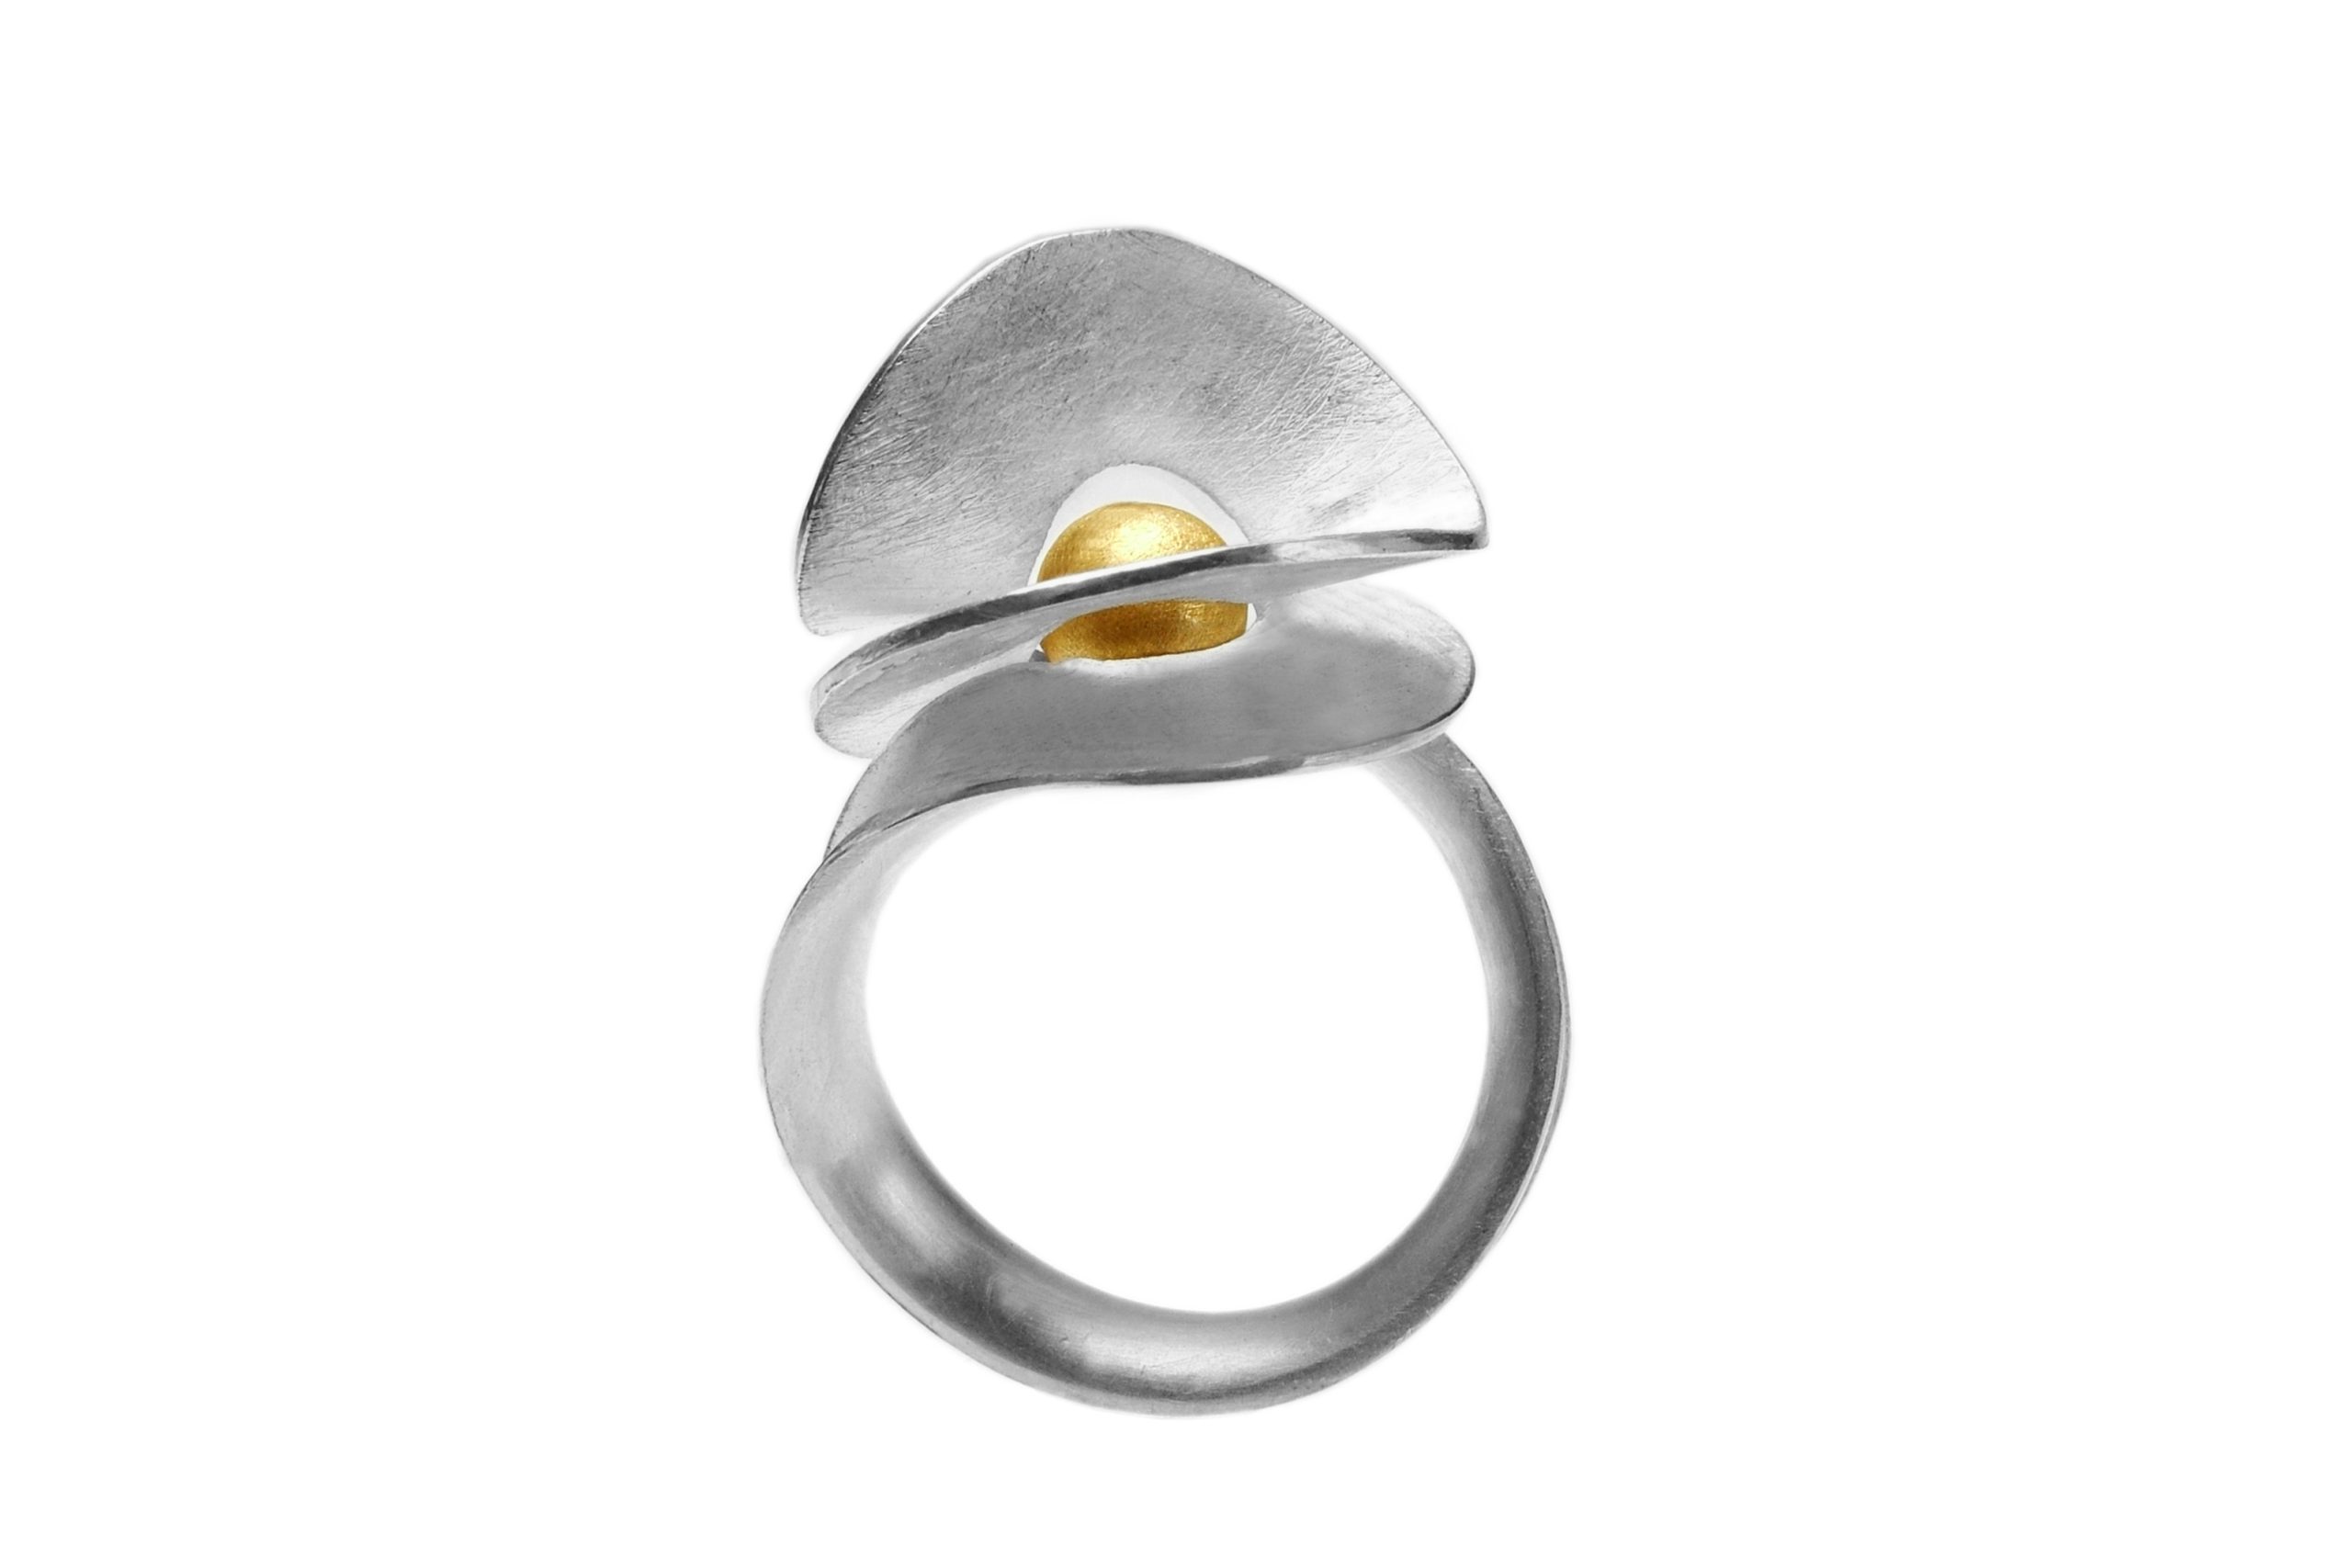 Silver and gold Moebius ring, a endless journey of playfulness.